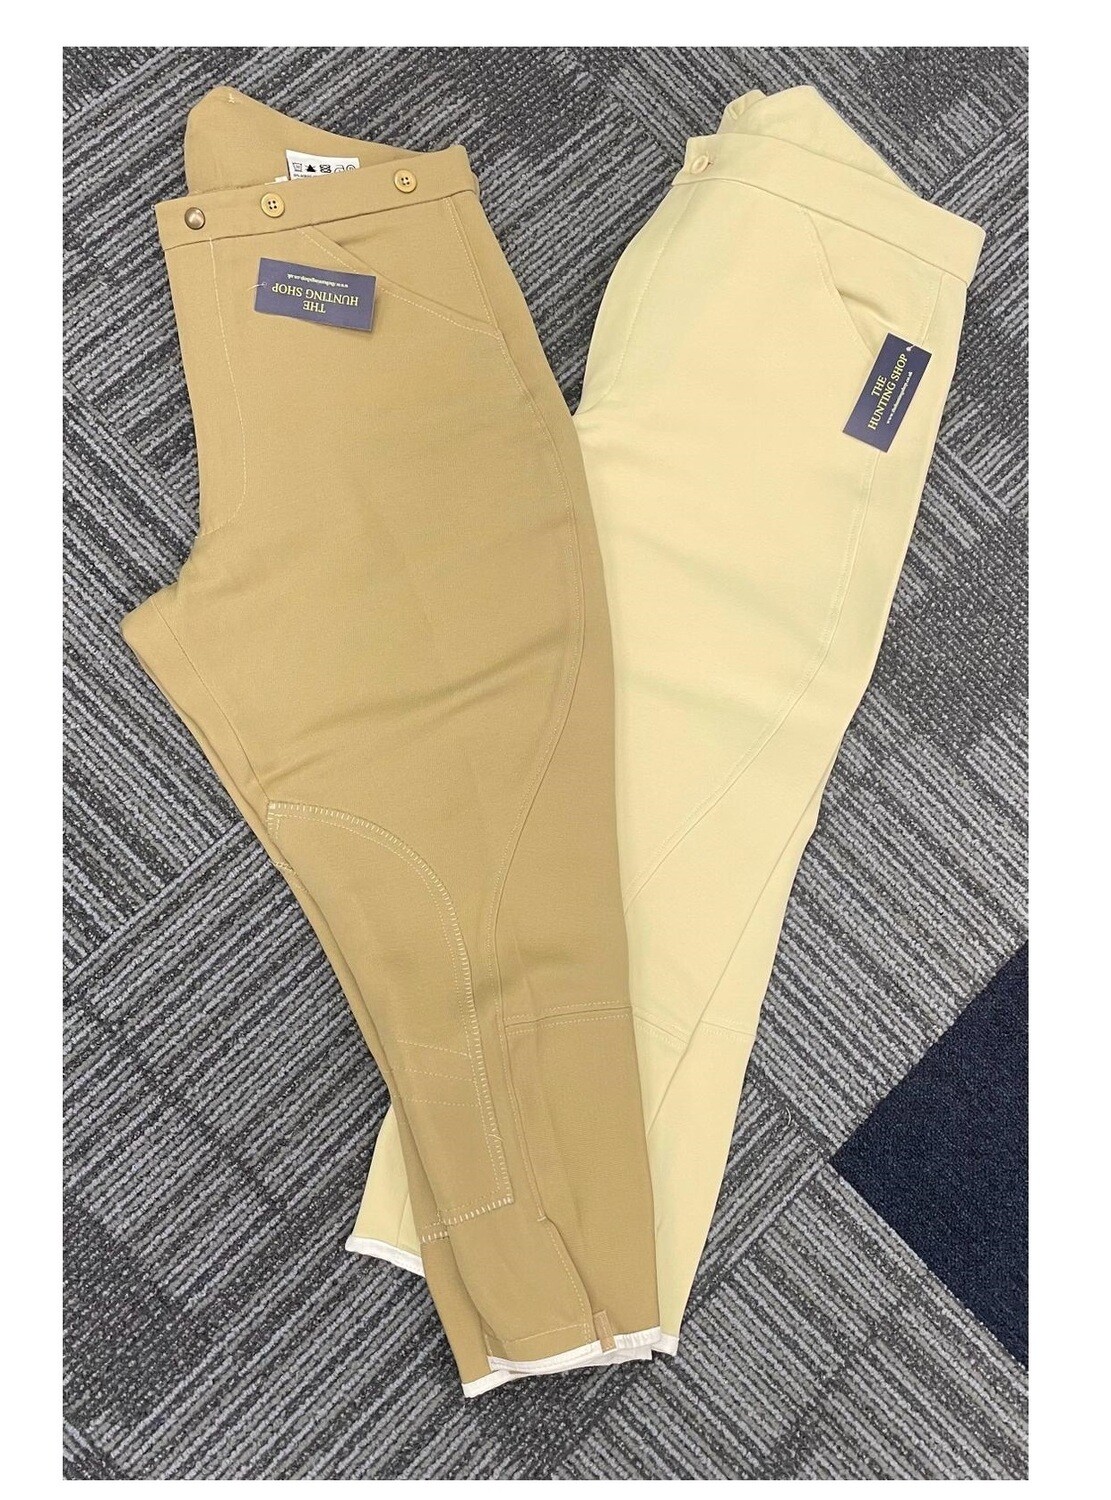 Gents 40" Long Fawn , Peaked Back, One Way Stretch Breeches - End of Season Sale